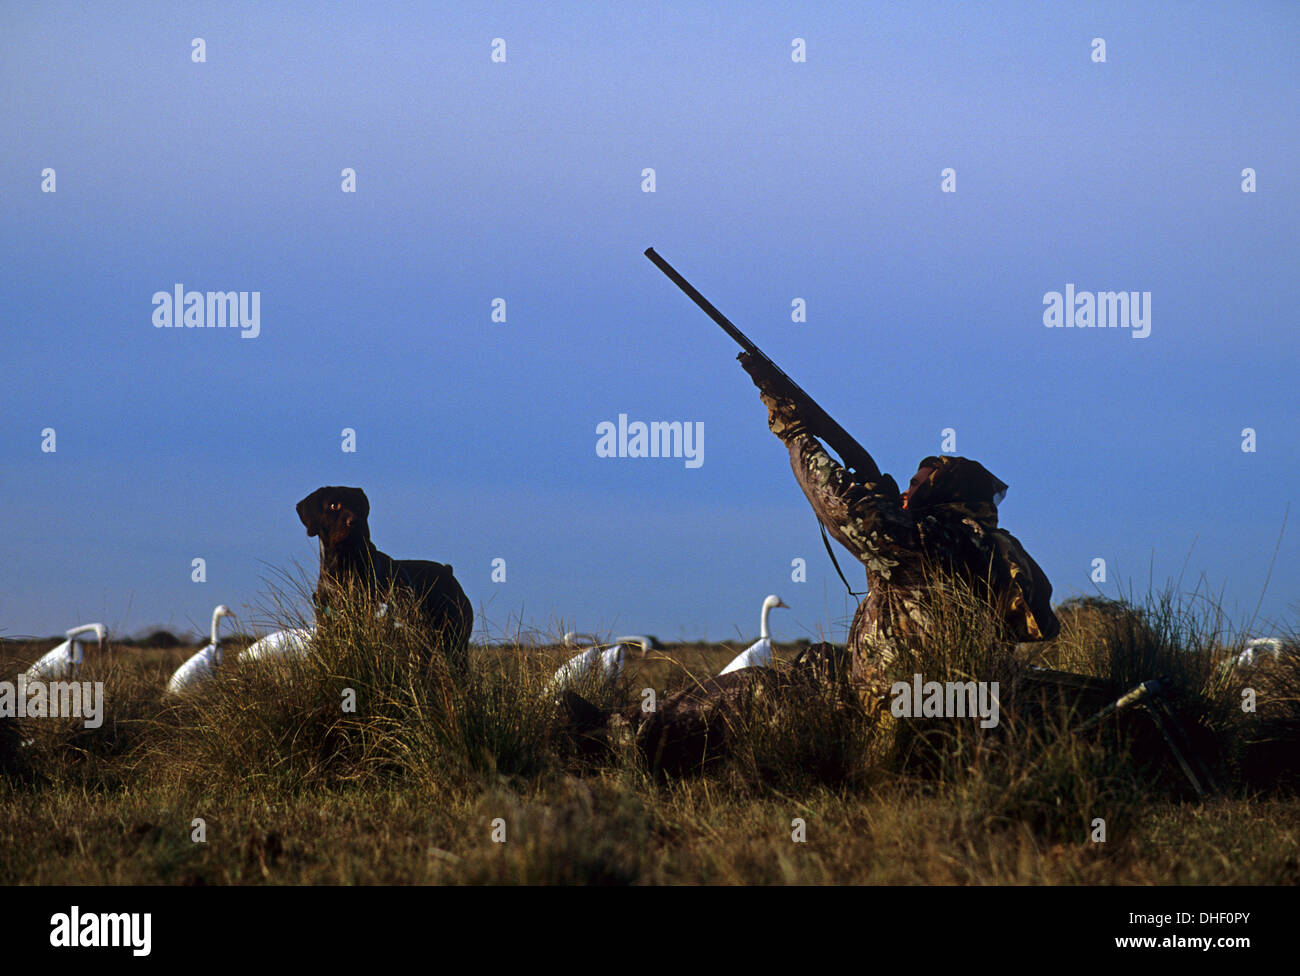 A hunter shooting at Snow geese (Chen caerulescens) while goose hunting at Port Lavaca Texas Stock Photo